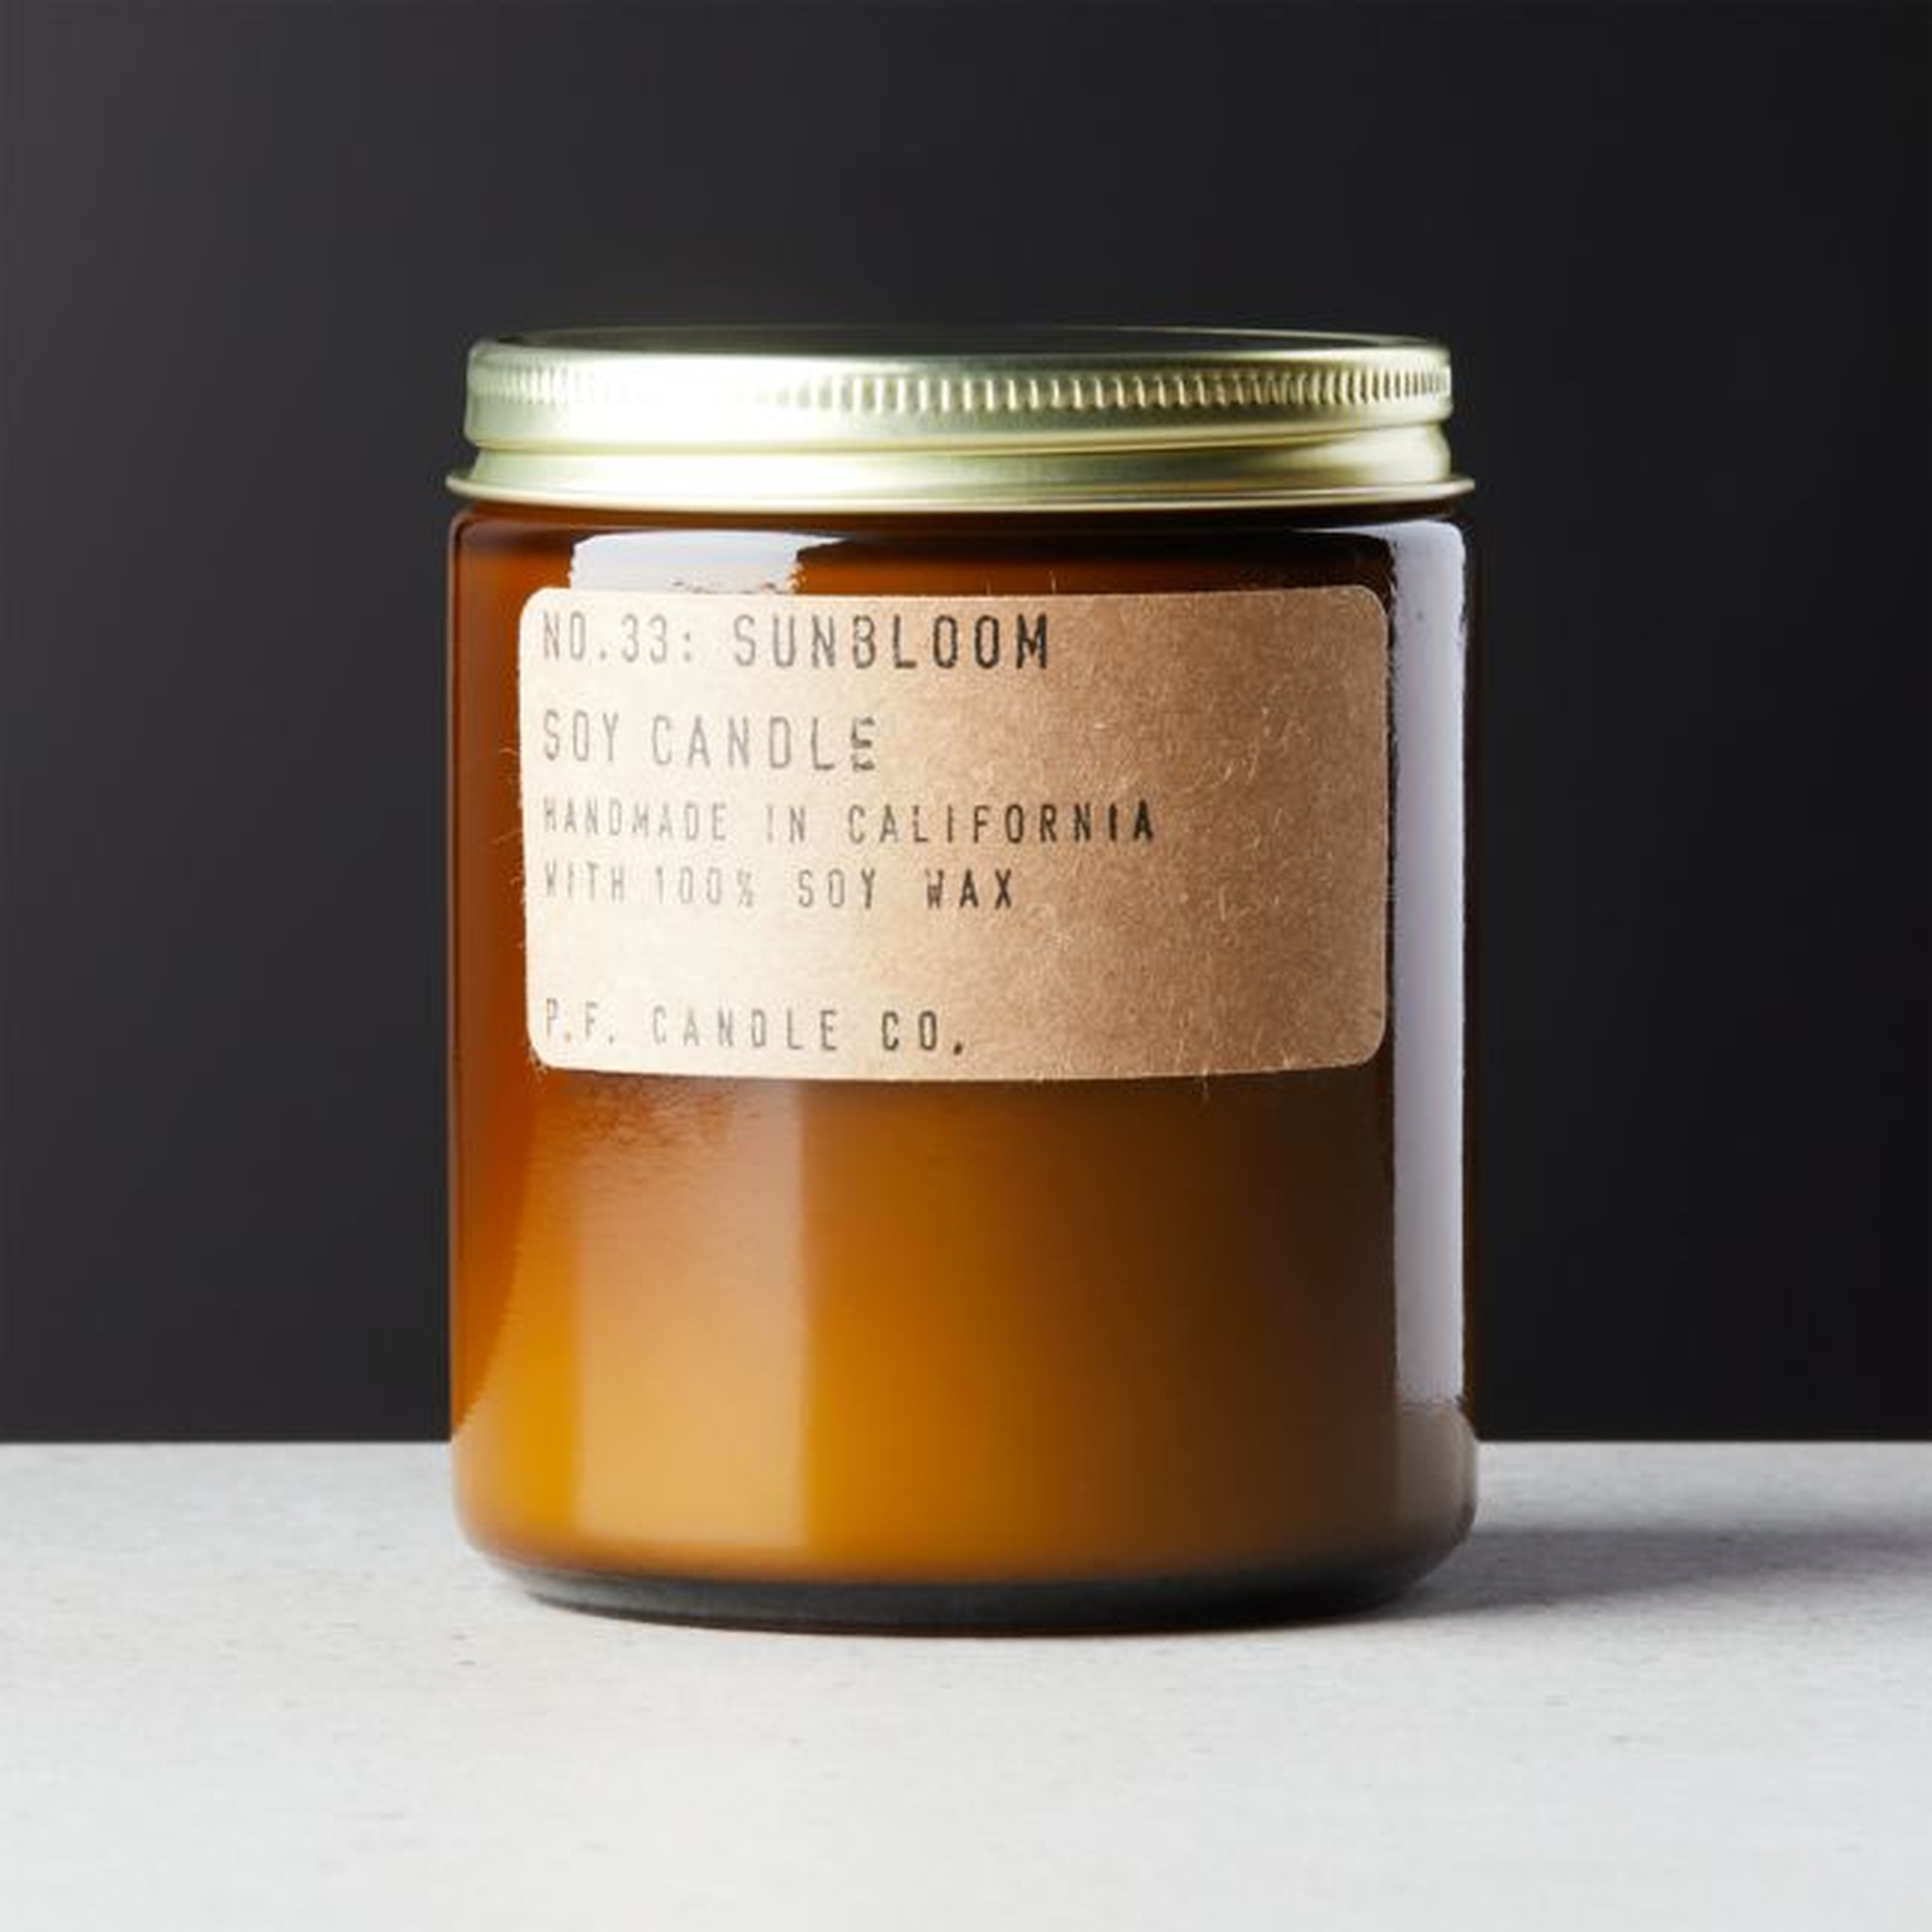 P.F. Candle Co. Sunbloom Soy Candle 7.5 oz. - CB2